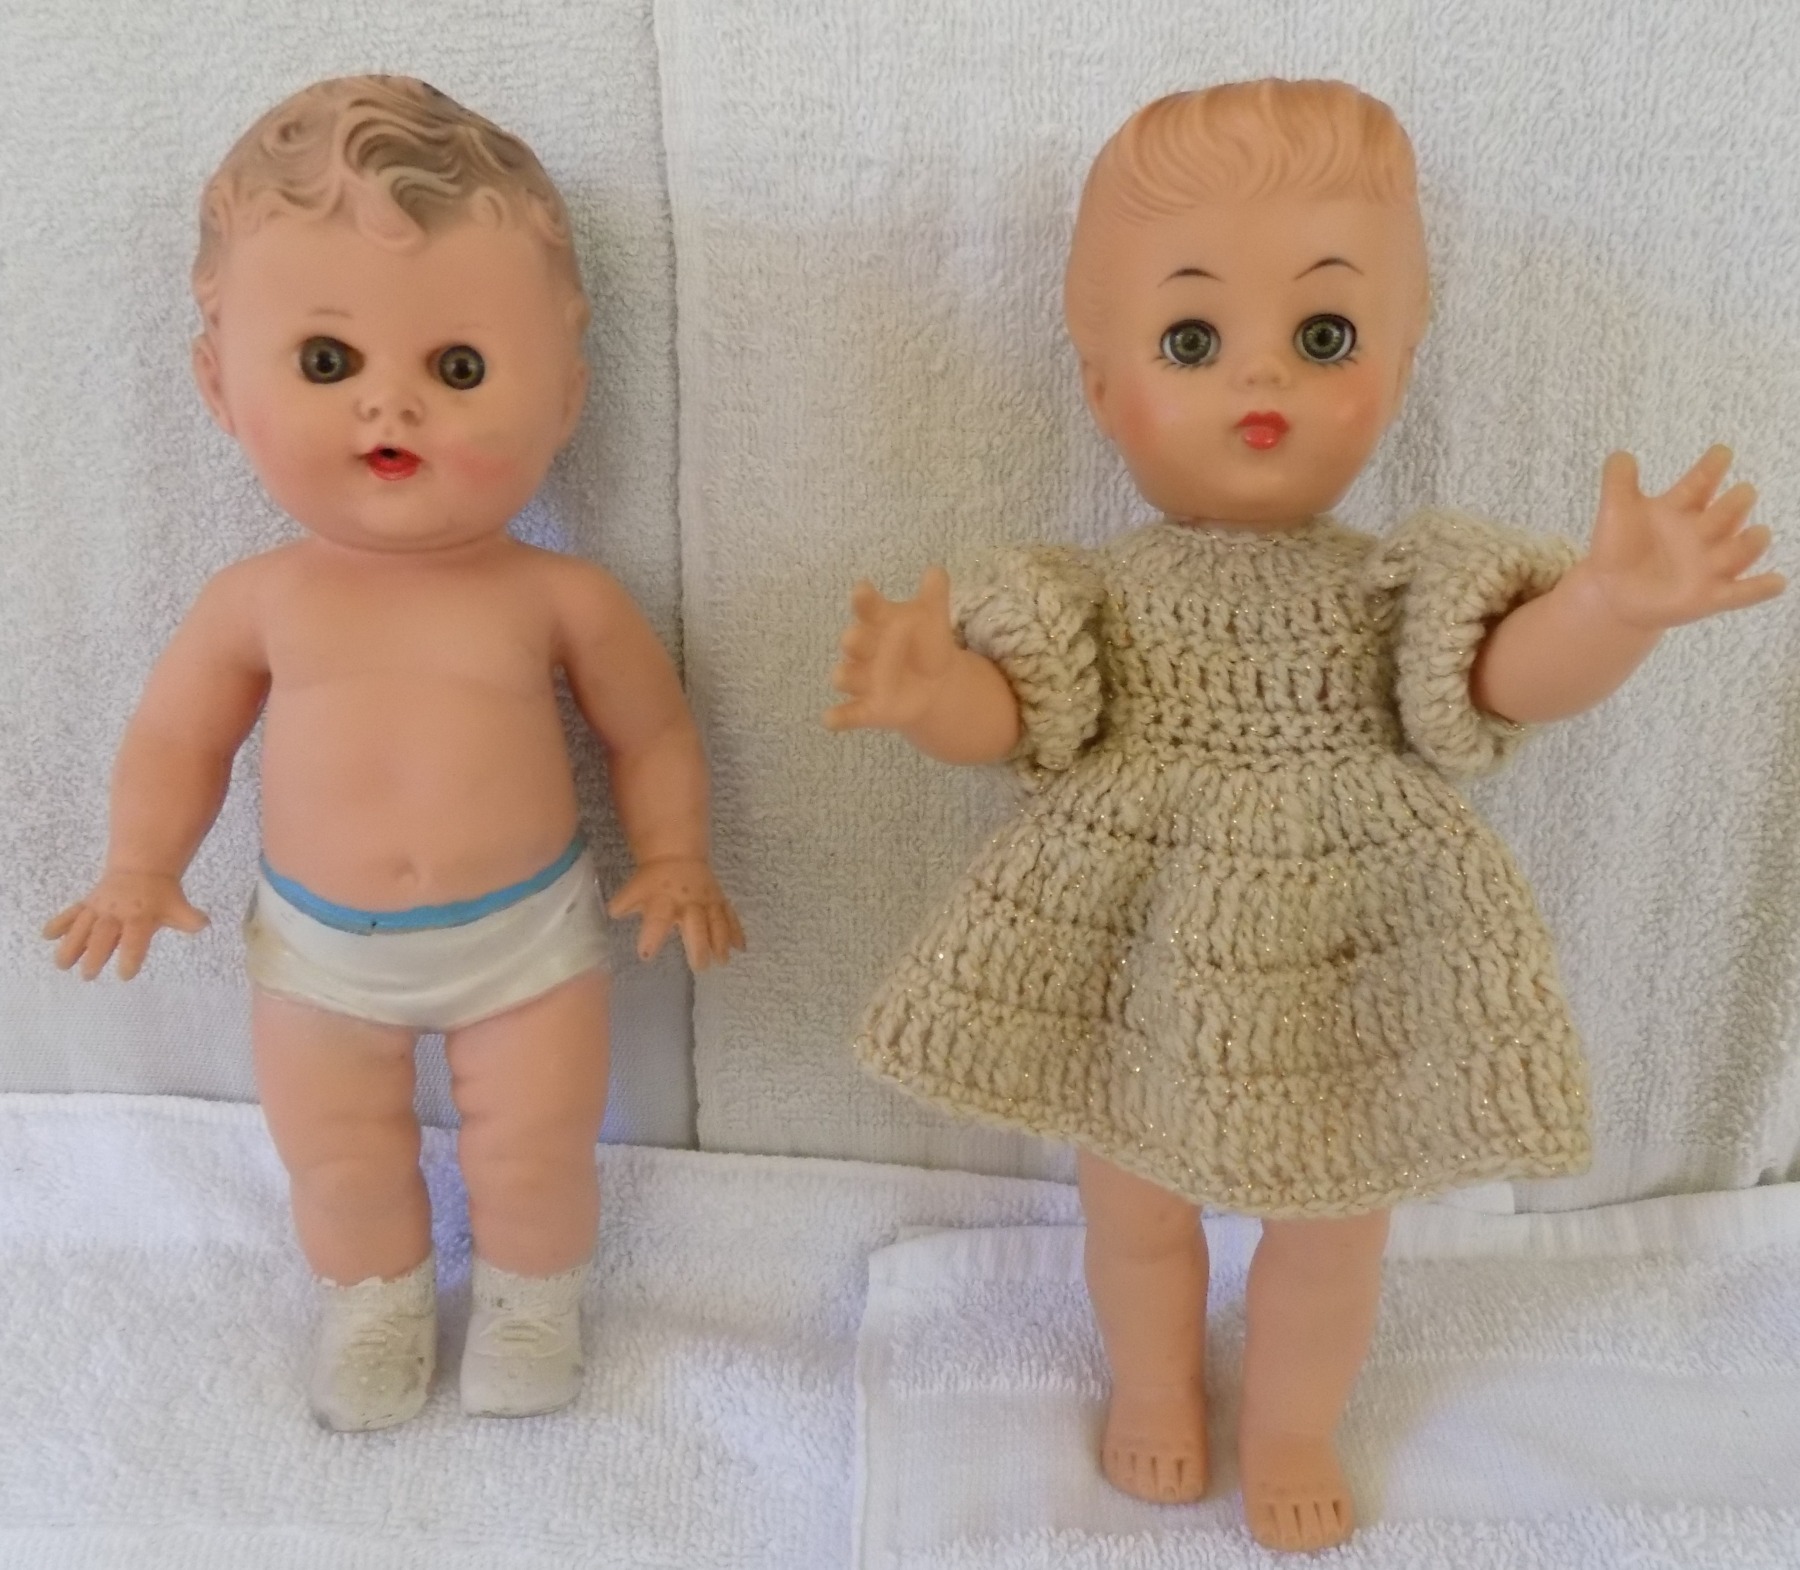 Pair of Vintage Rubber Dolls #2 Treasures Collectibles